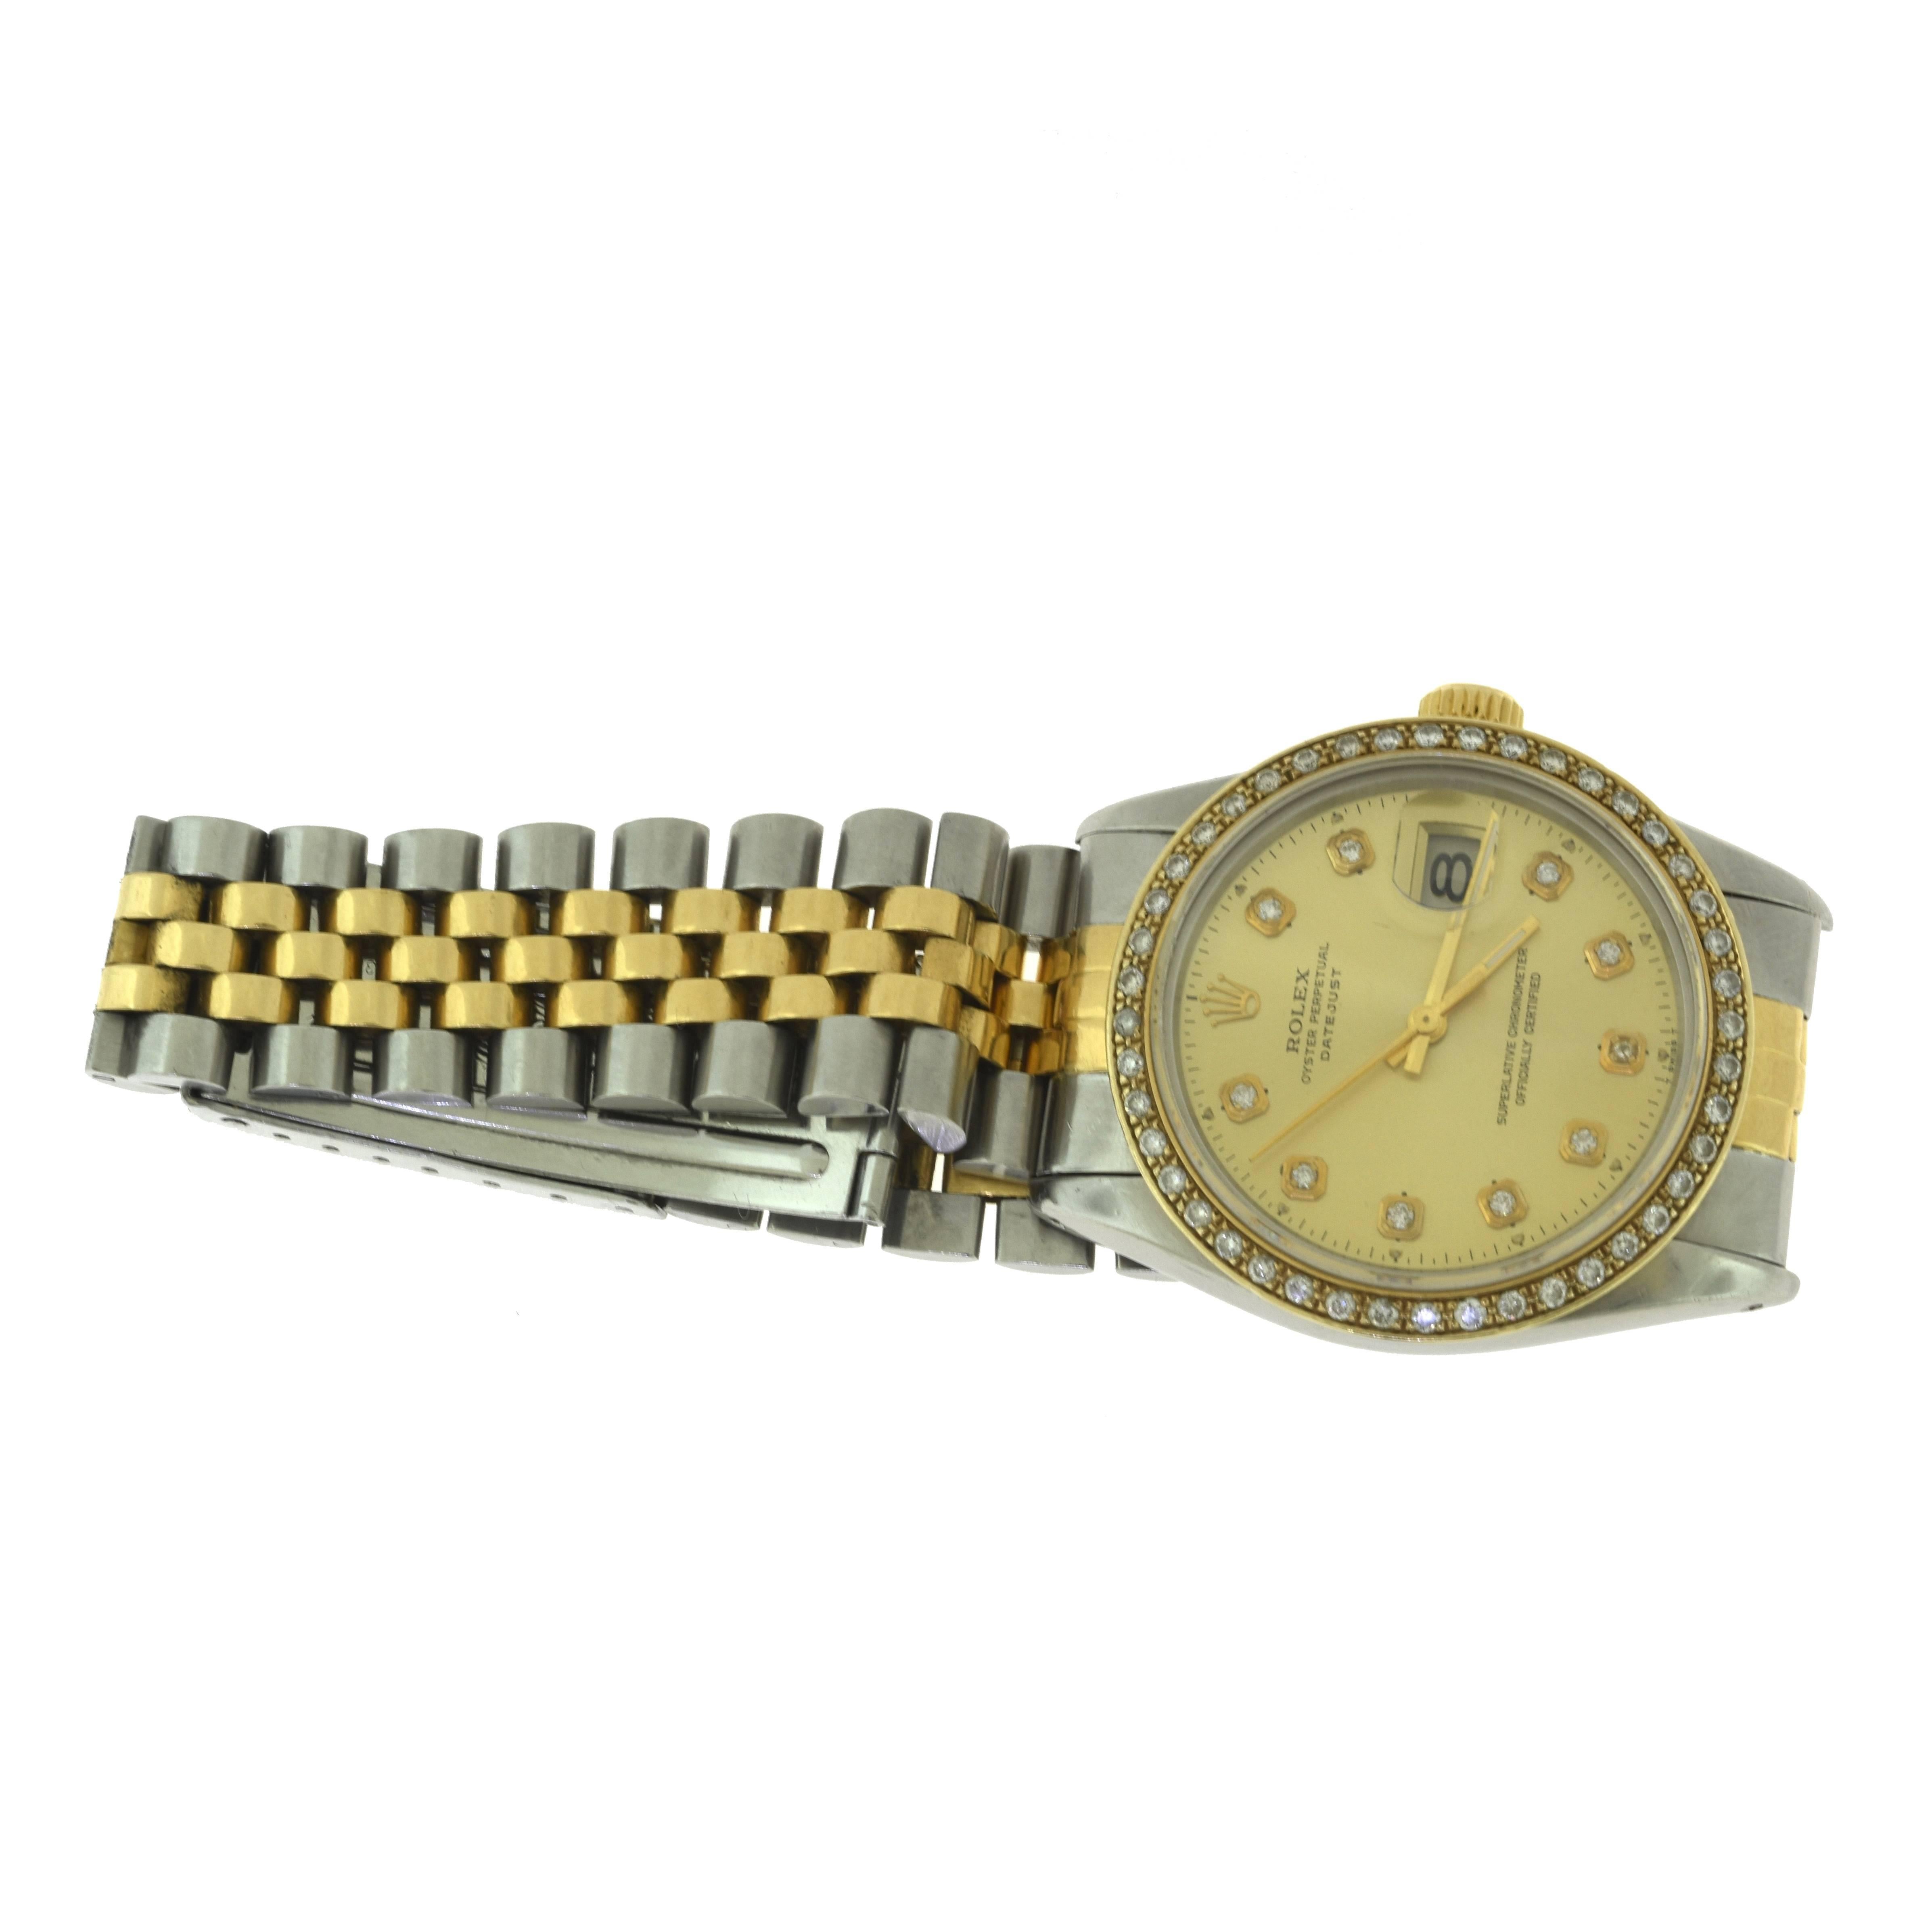 Brand: Rolex
Model Name: Datejust
Model Number: 16013
Movement: Automatic (Mechanical) 
Calibre: 3035
Jewels: More than 23 
Dial: Custom Champagne with Diamonds  
Case Size: 36 mm
Bezel: Diamonds 
Bracelet: 18k Yellow Gold, Stainless Steel Jubilee 